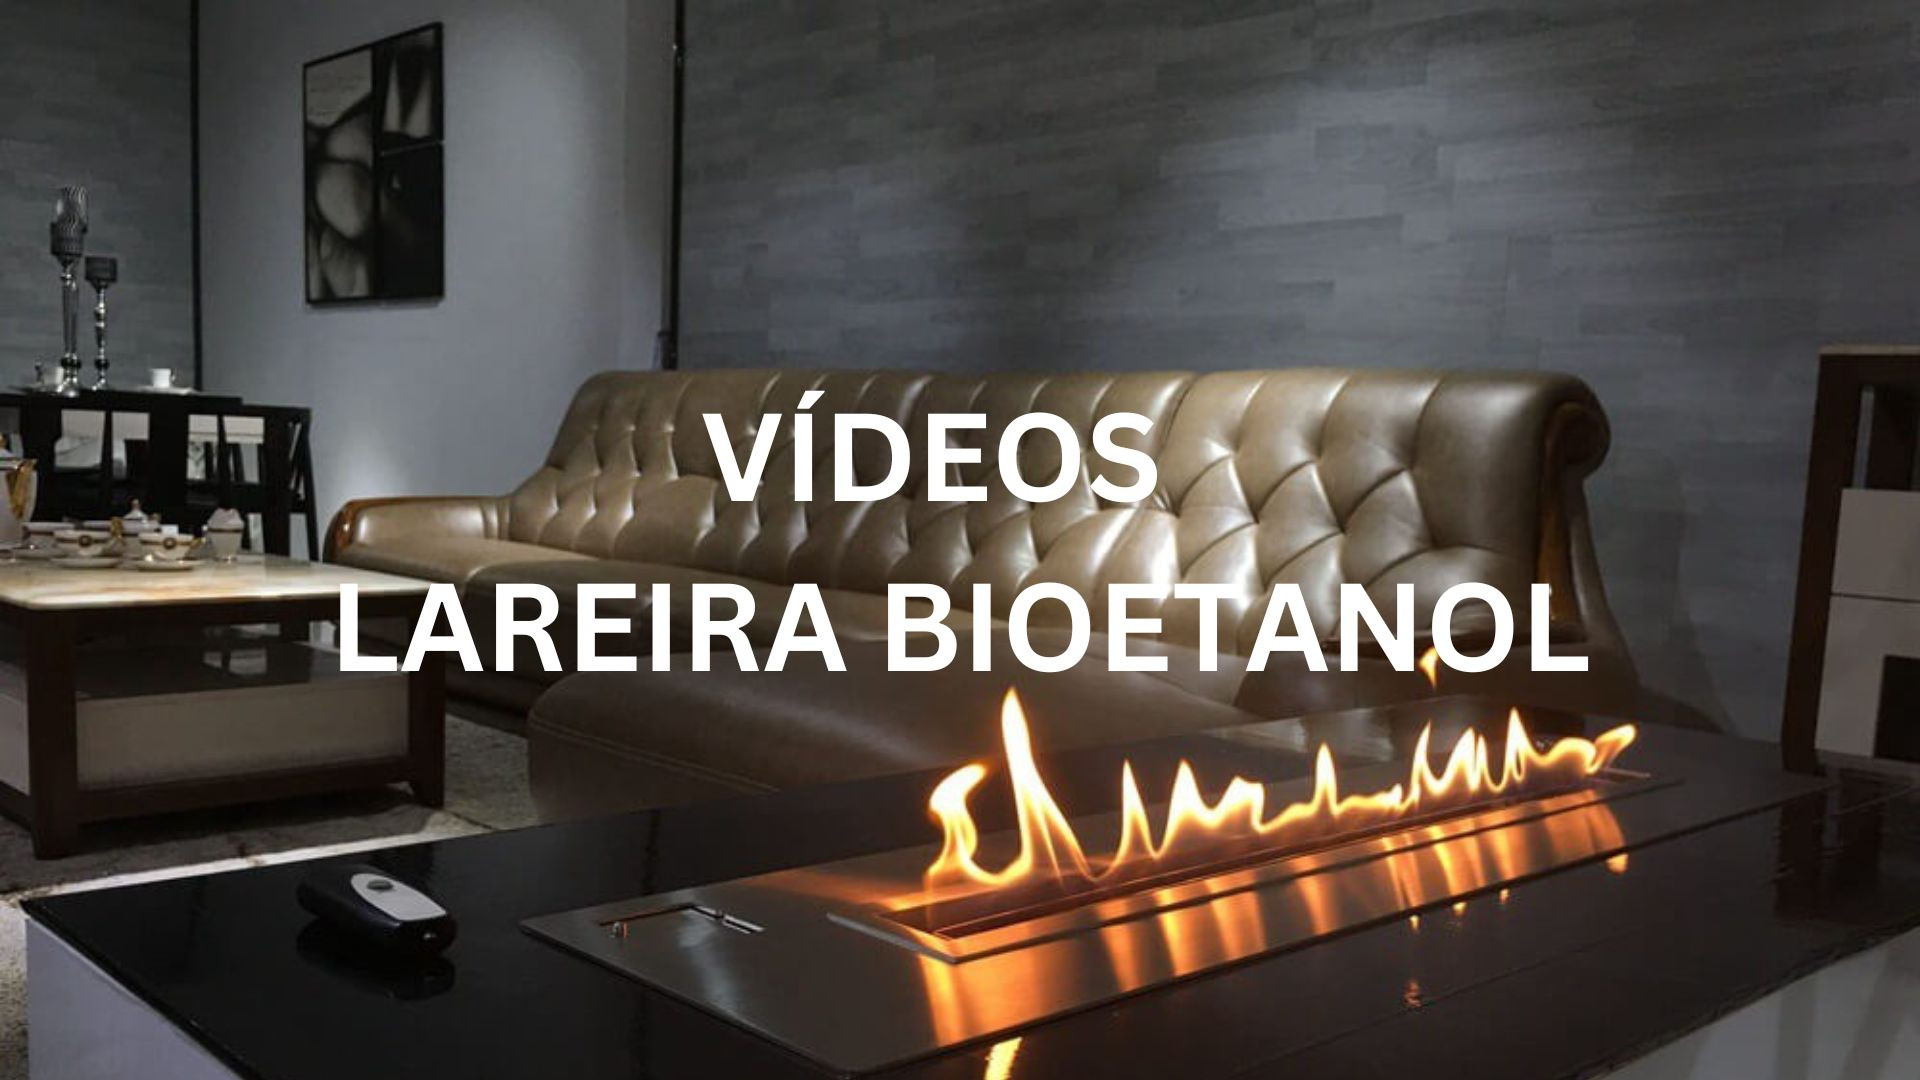 Bioethanol Fireplace video library